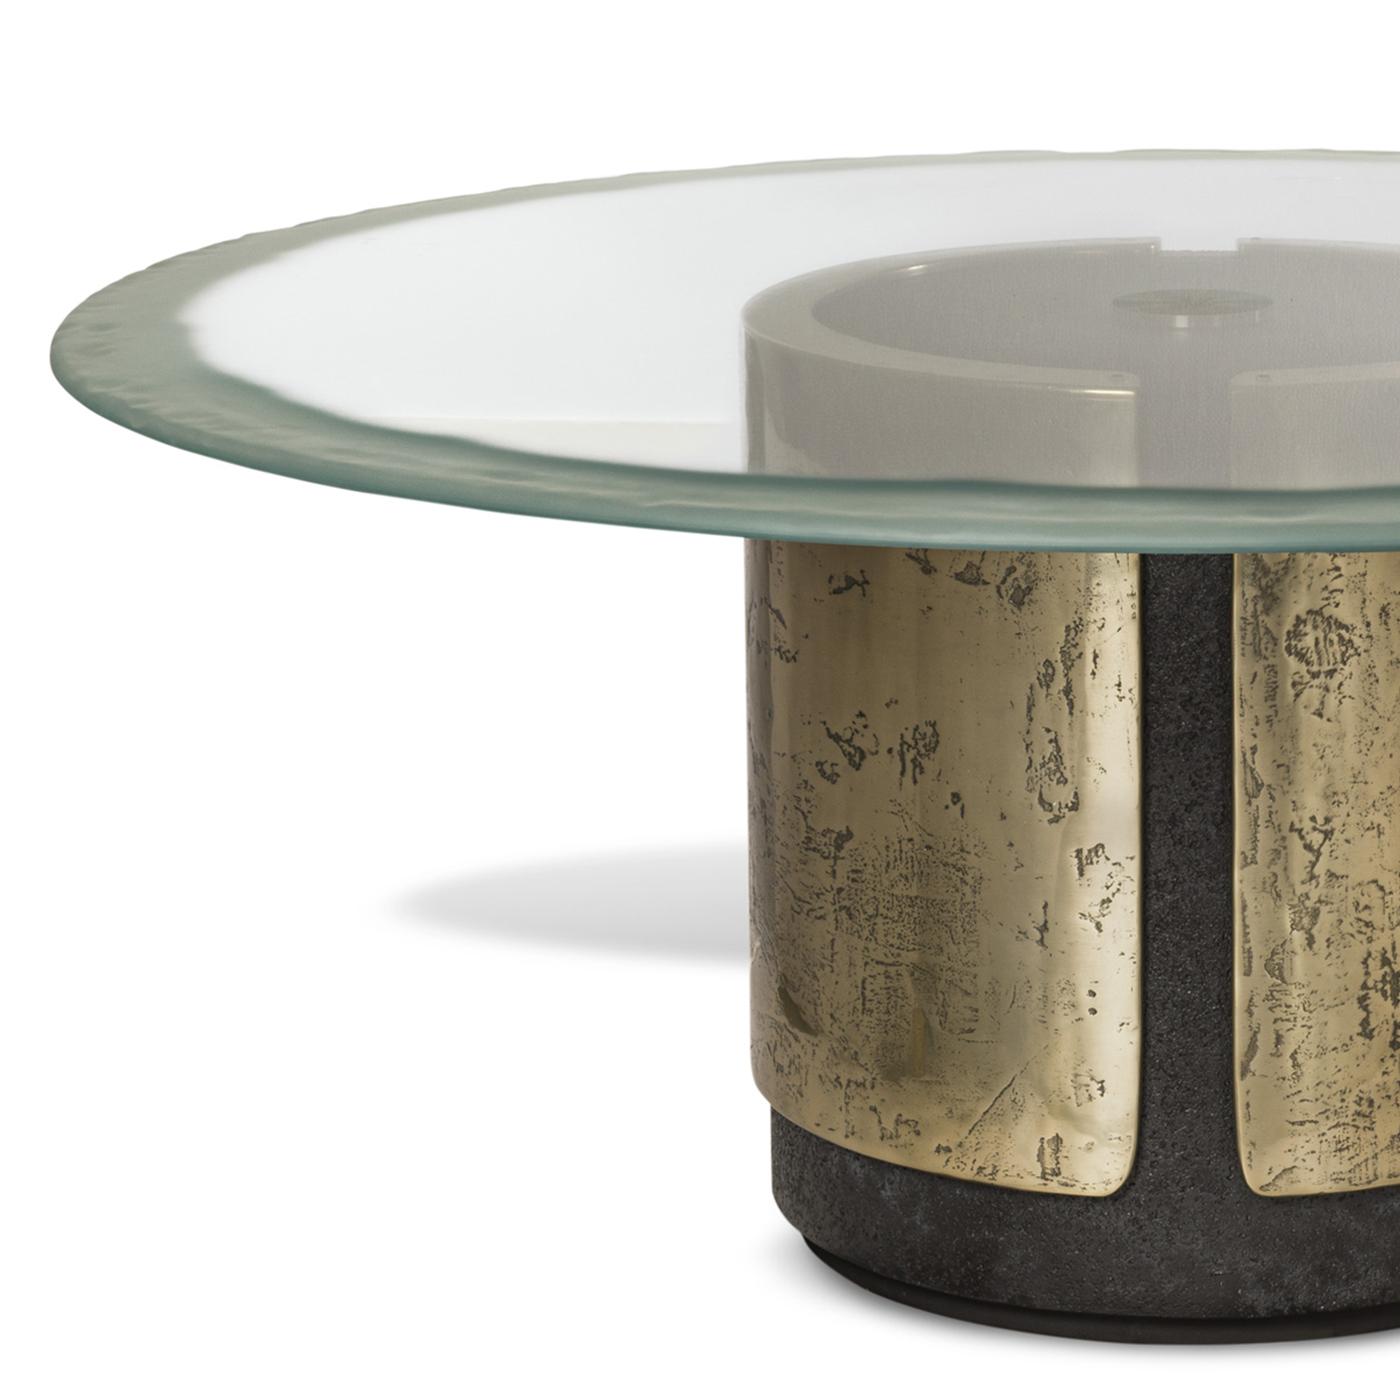 Dining table Salerne with subtle base made with central
part in concrete in black matt finish and with 2 parts in solid 
raw casted aluminium polished and lacquered in gold finish.
With CLear glass top, 19mm thickness with edge in special